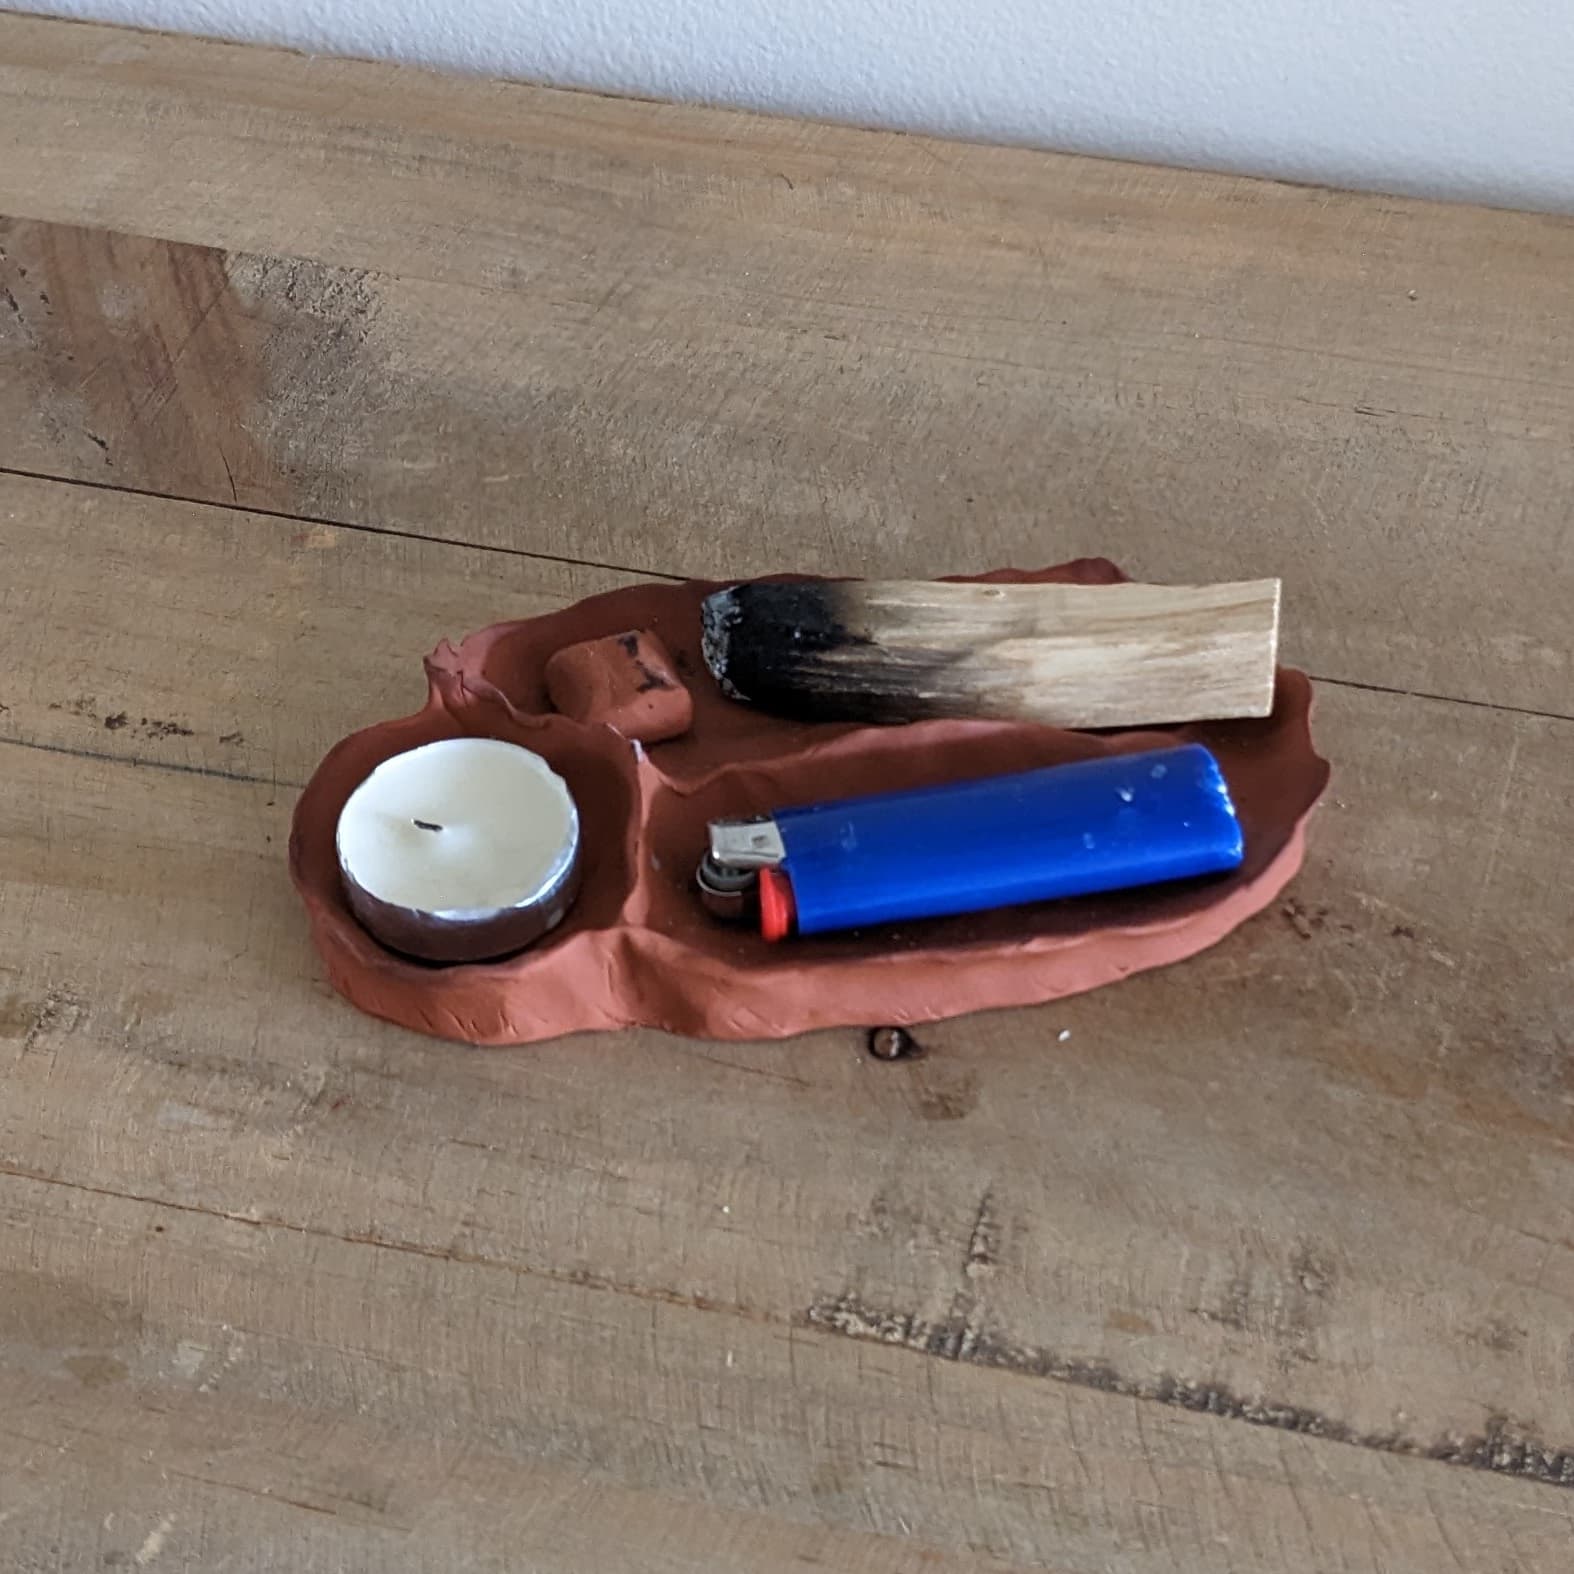 Palo Santo Holder made from oven-dry clay, designed to hold a tea light, a lighter, and a single piece of Palo Santo wood.